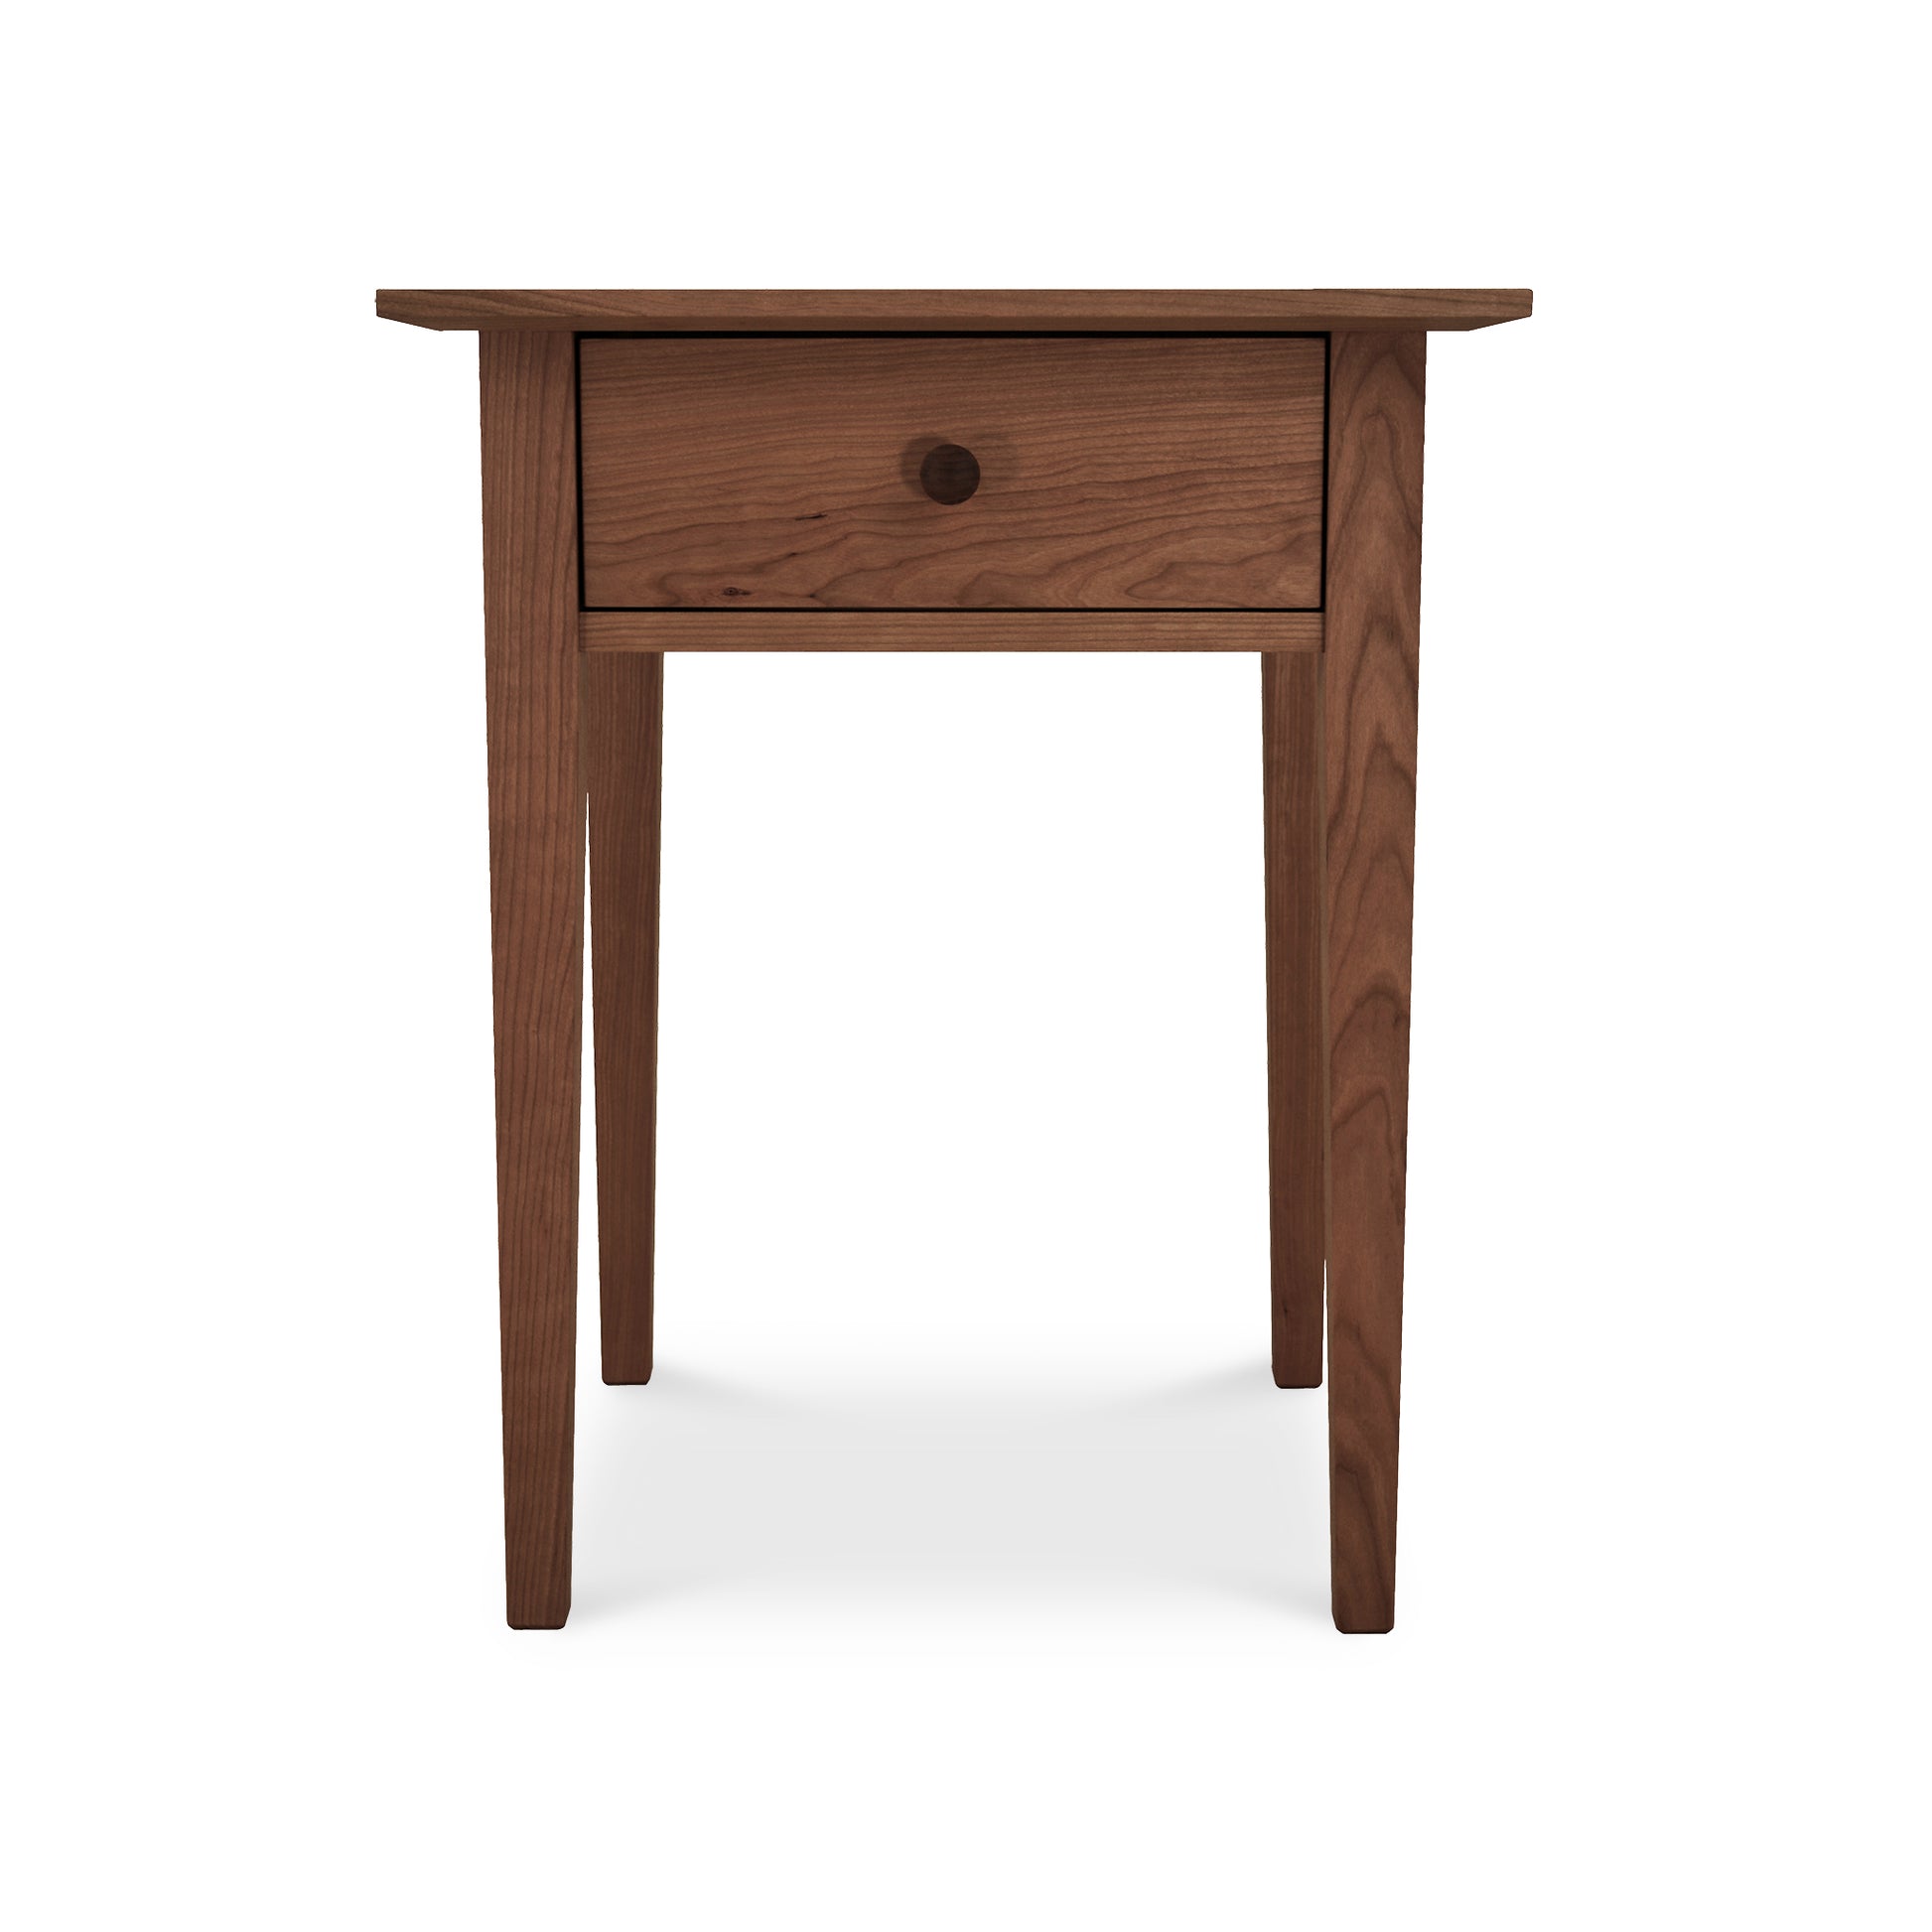 A simple wooden end table with a single drawer, featuring a round knob and a smooth finish, isolated on a white background is transformed into an Maple Corner Woodworks American Shaker 1-Drawer Nightstand.